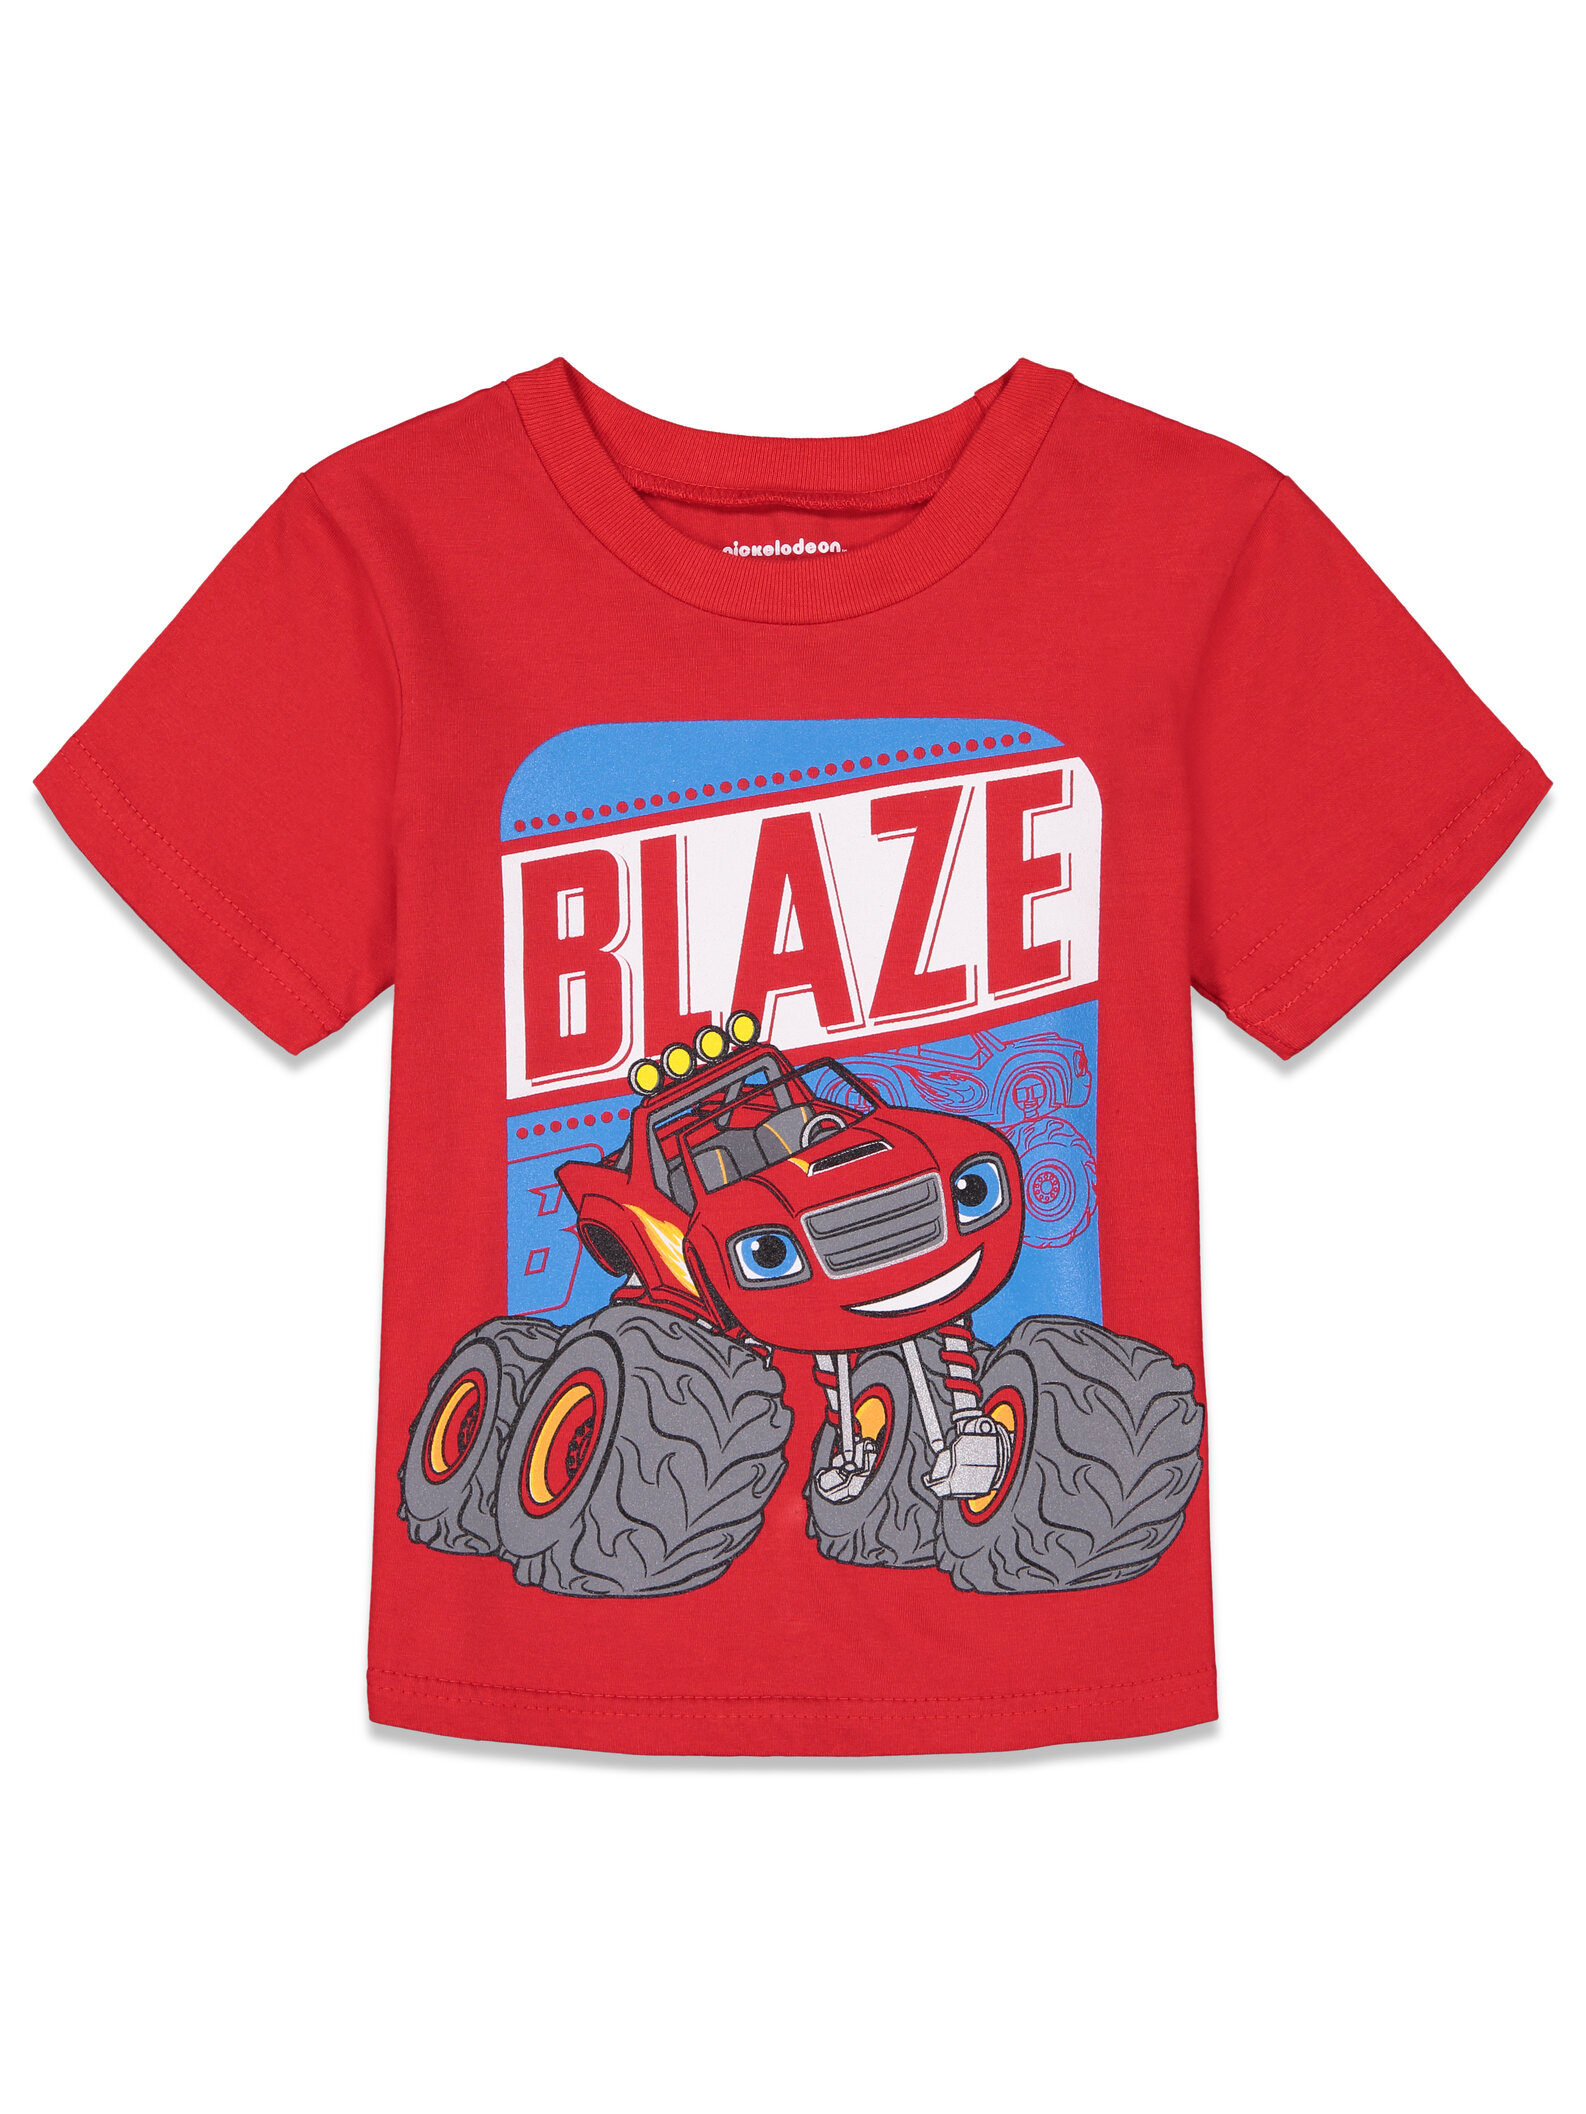 Blaze and the Monster Machines Little Boys Graphic T-Shirt Mesh Shorts Outfit Set Red / Black 6 - image 2 of 5